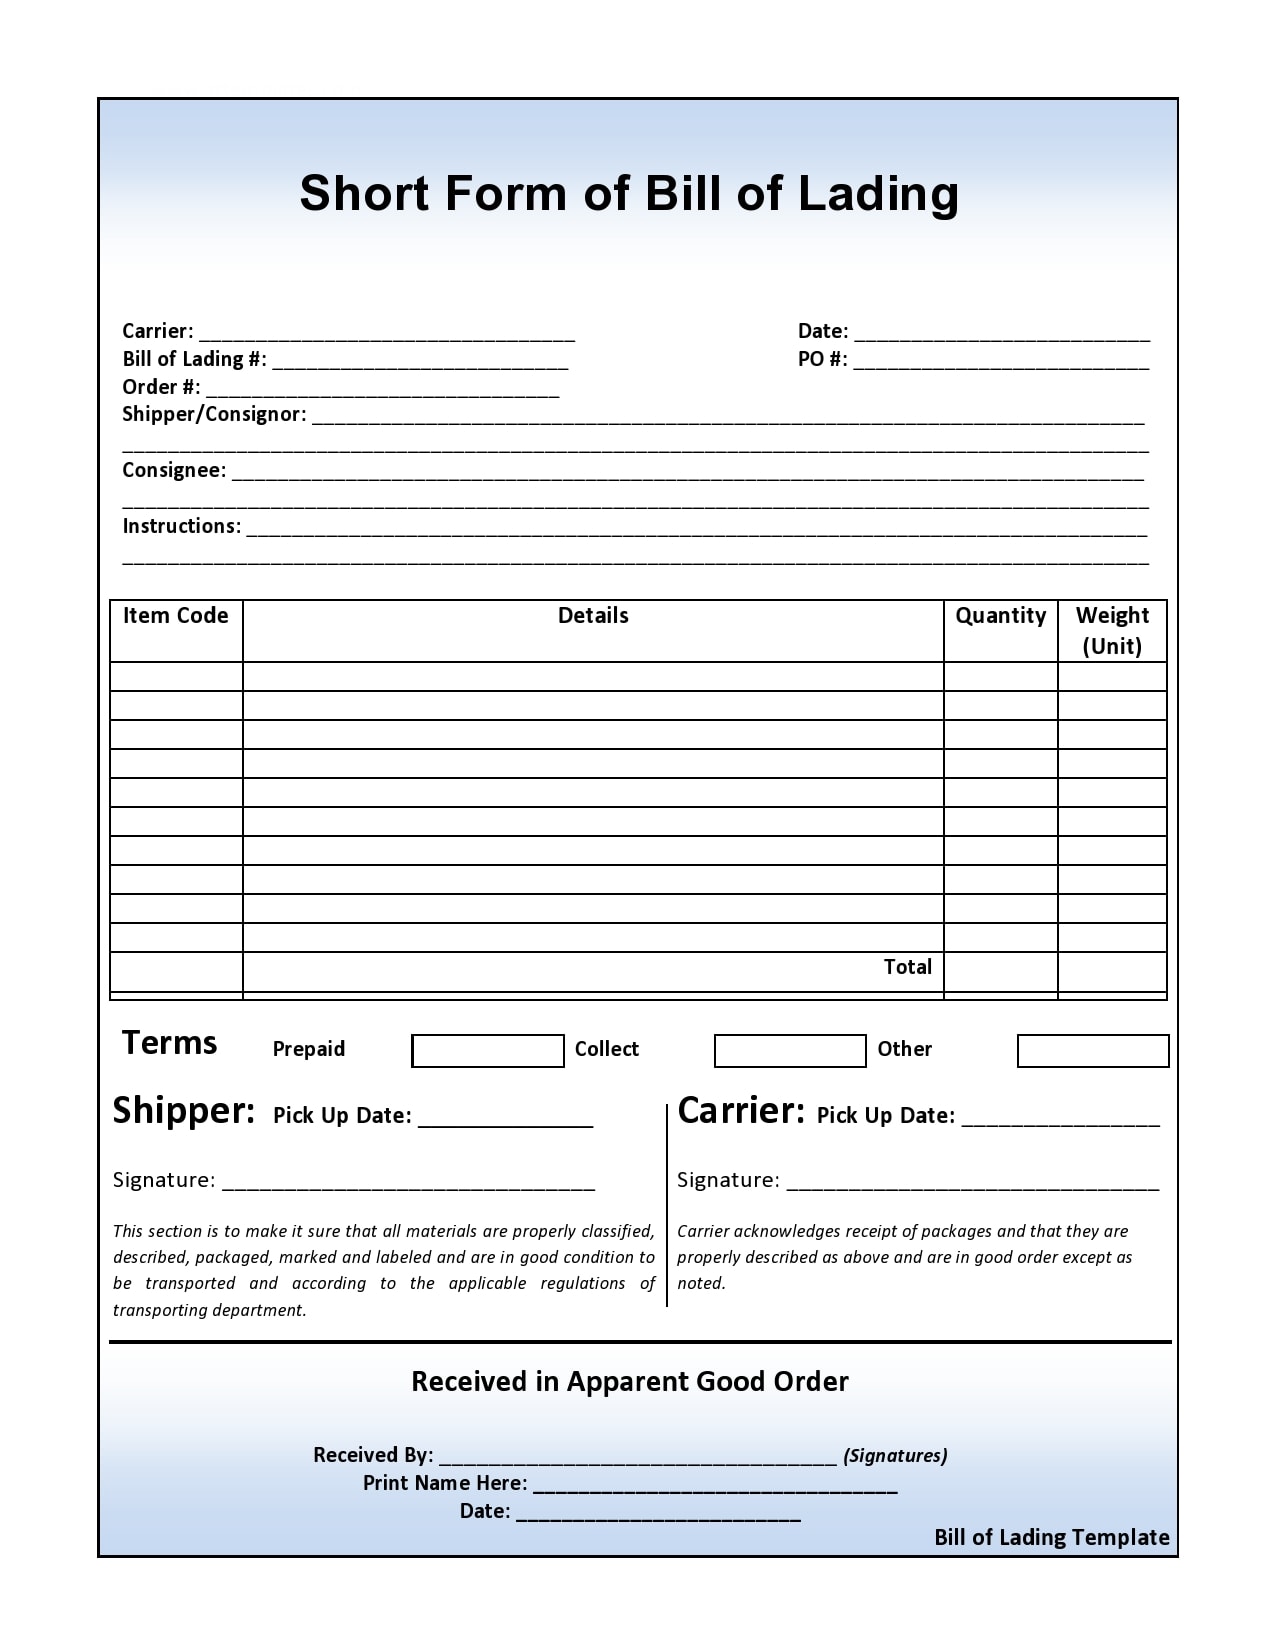 30-blank-bill-of-lading-templates-100-free-templatearchive